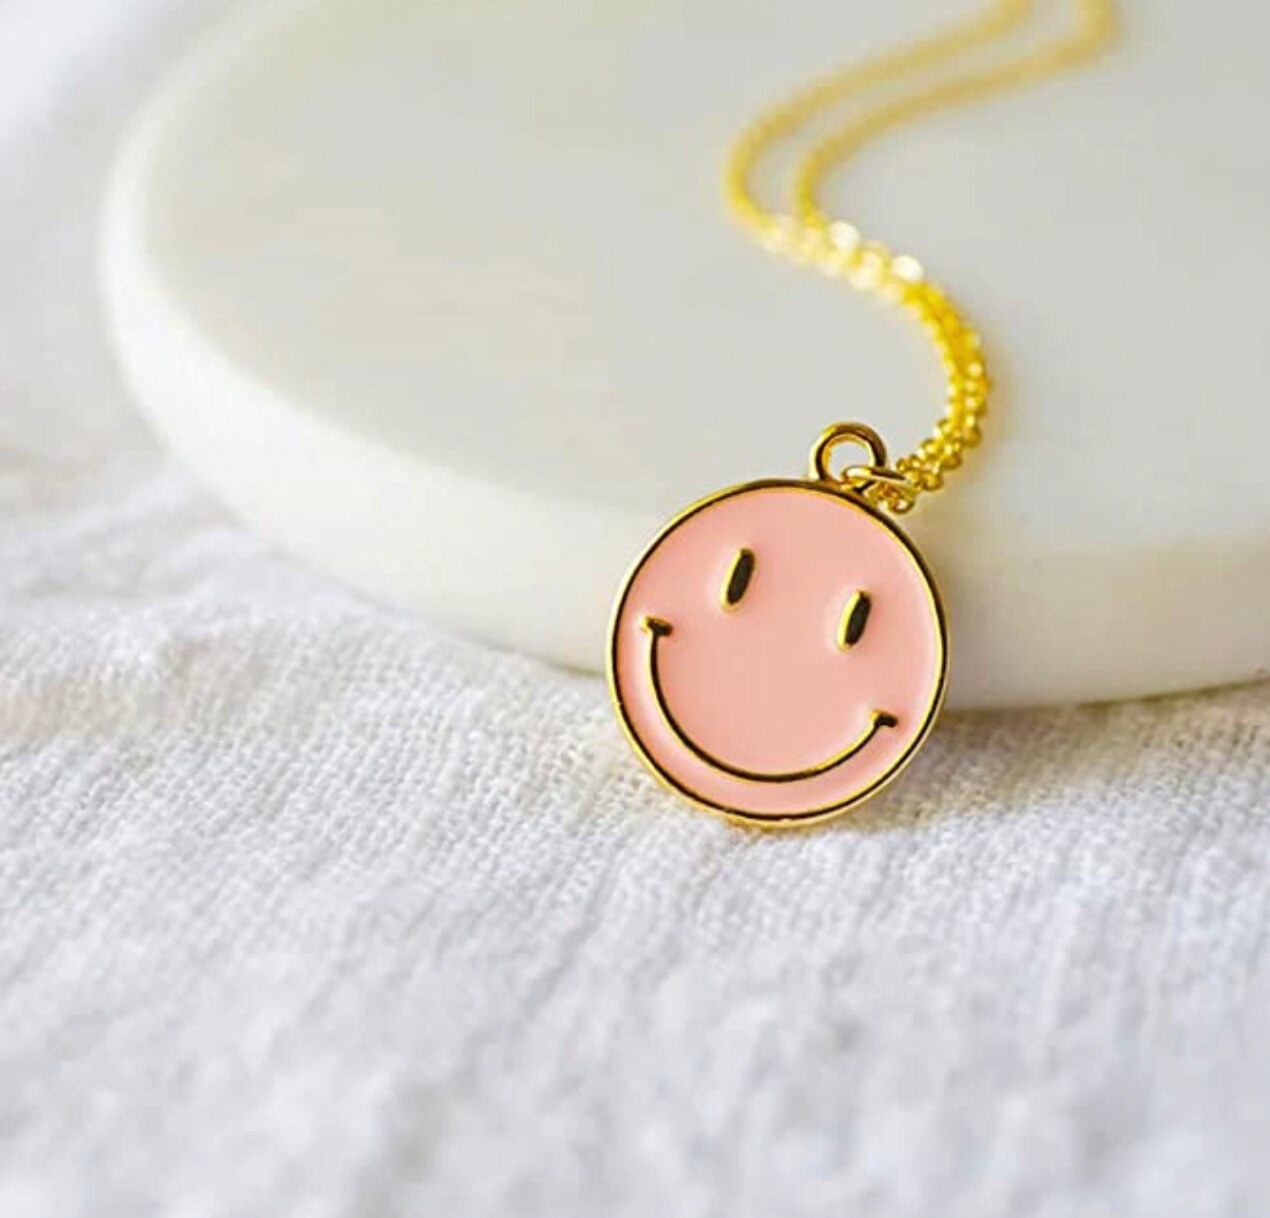 The Smiley Necklace